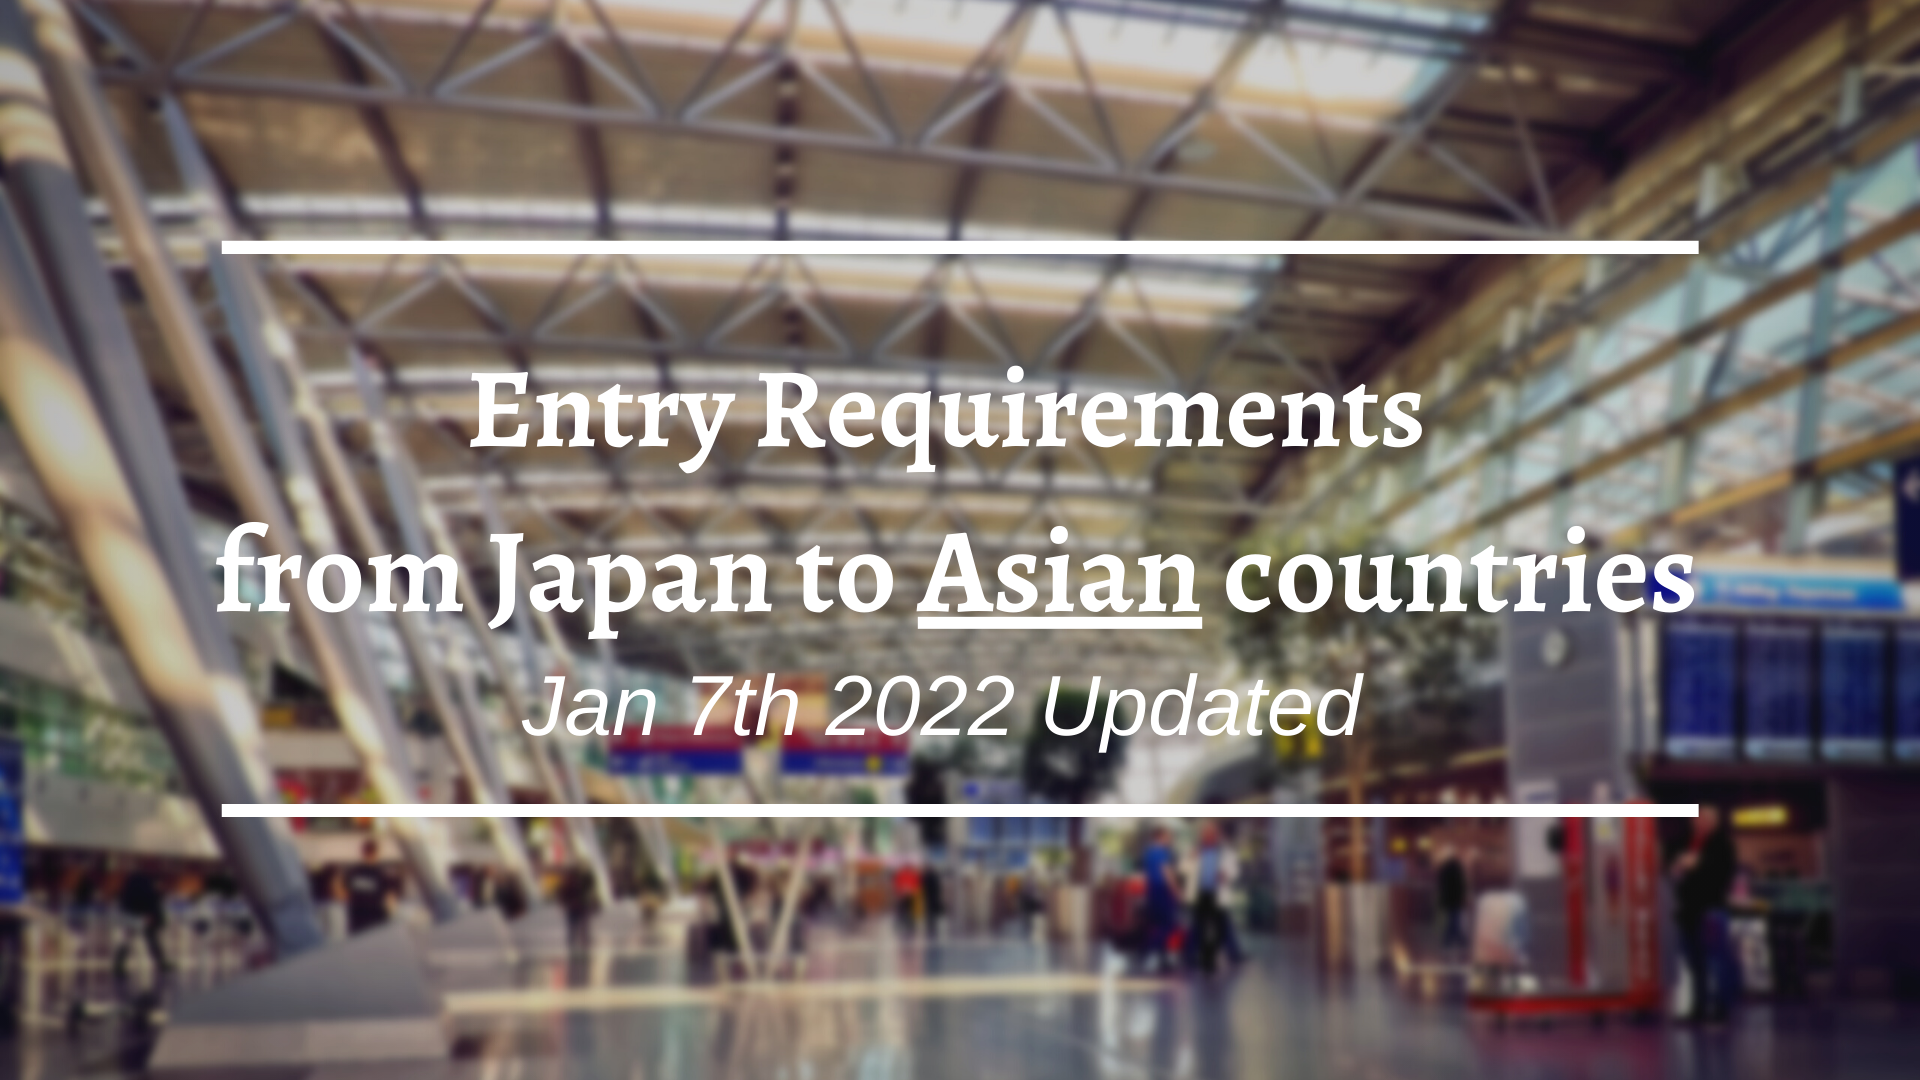 Entry Requirements from Japan to Asian countries